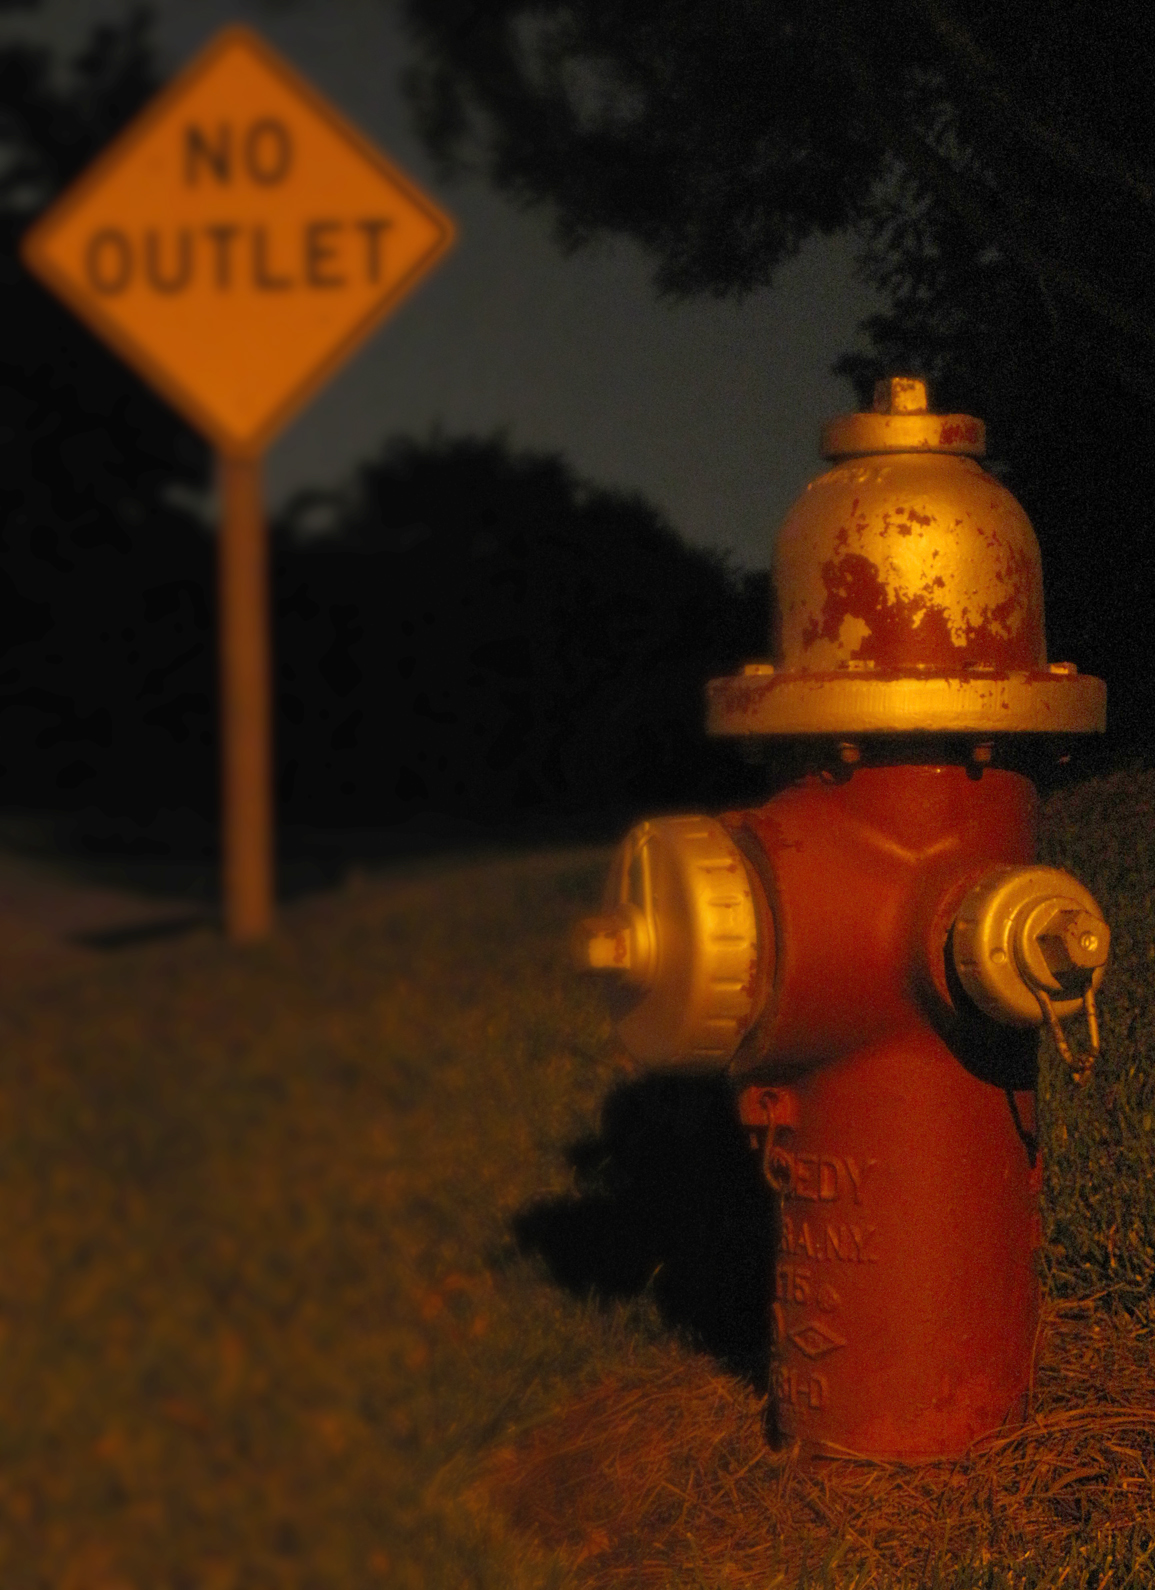 a fire hydrant in the grass near a sign